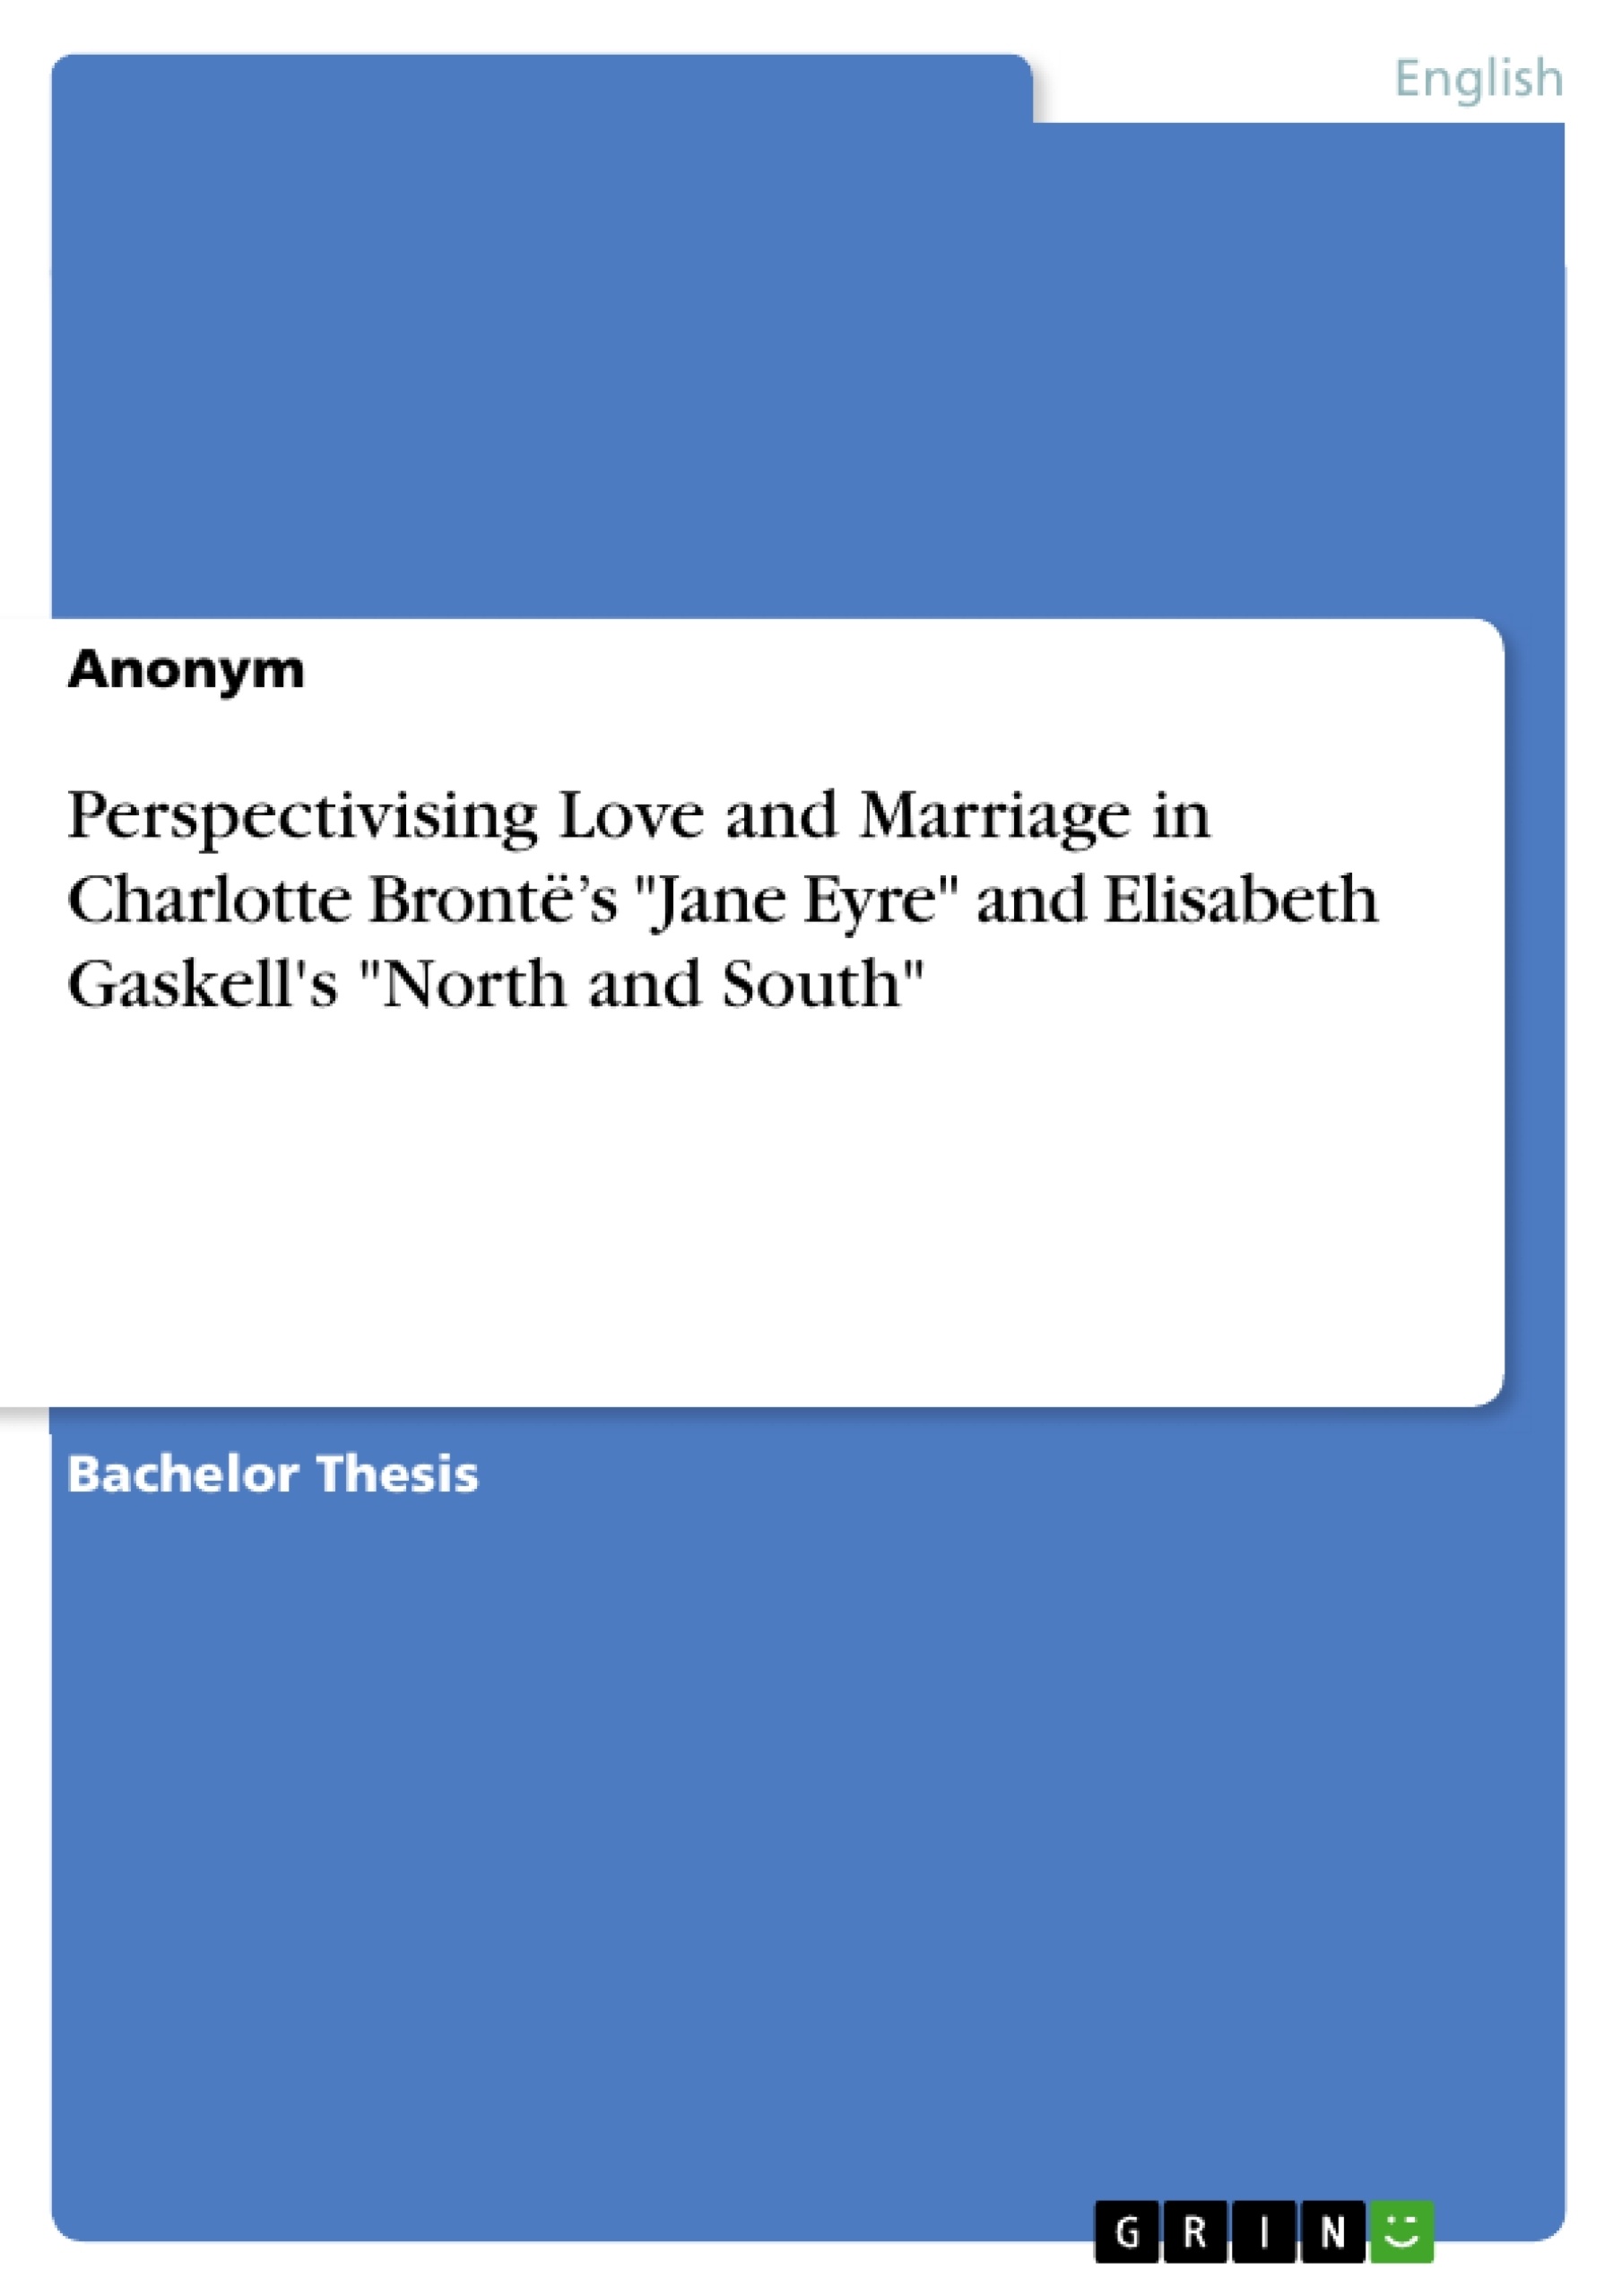 Title: Perspectivising Love and Marriage in Charlotte Brontë’s "Jane Eyre" and Elisabeth Gaskell's "North and South"